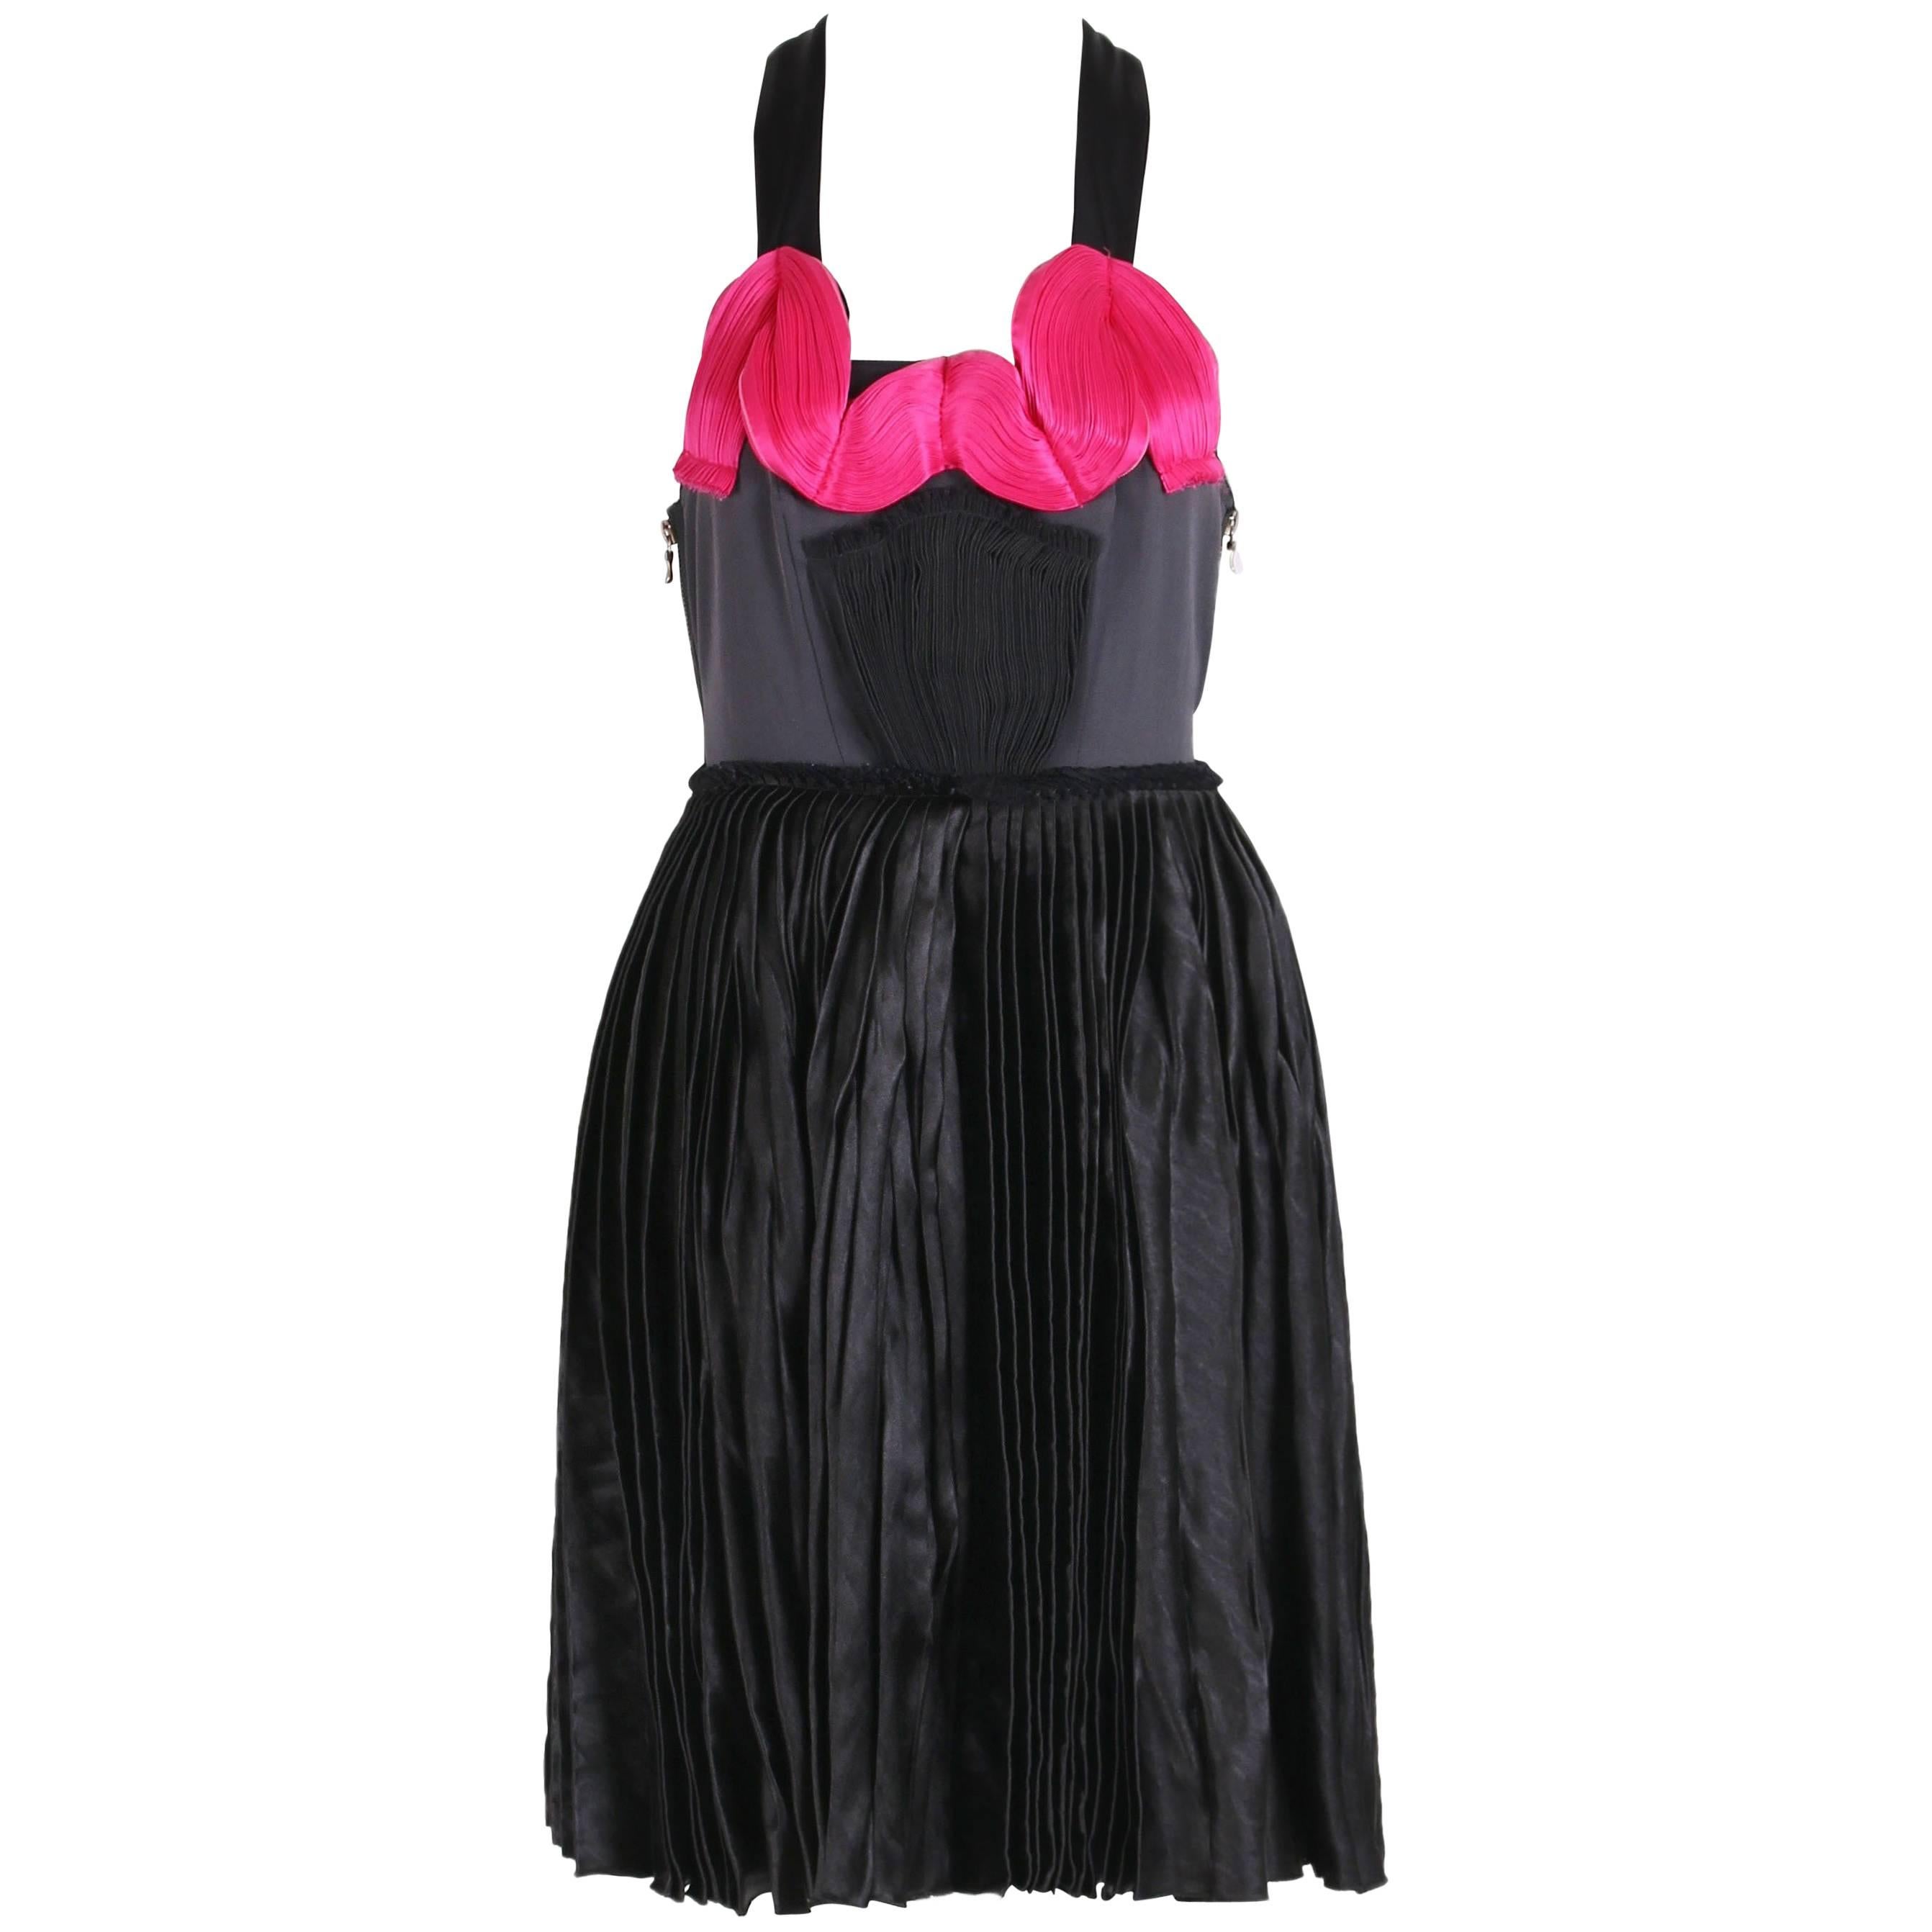 Lanvin Black and Hot Pink Sleeveless Mini Dress with Pleated Skirt, 2007  For Sale